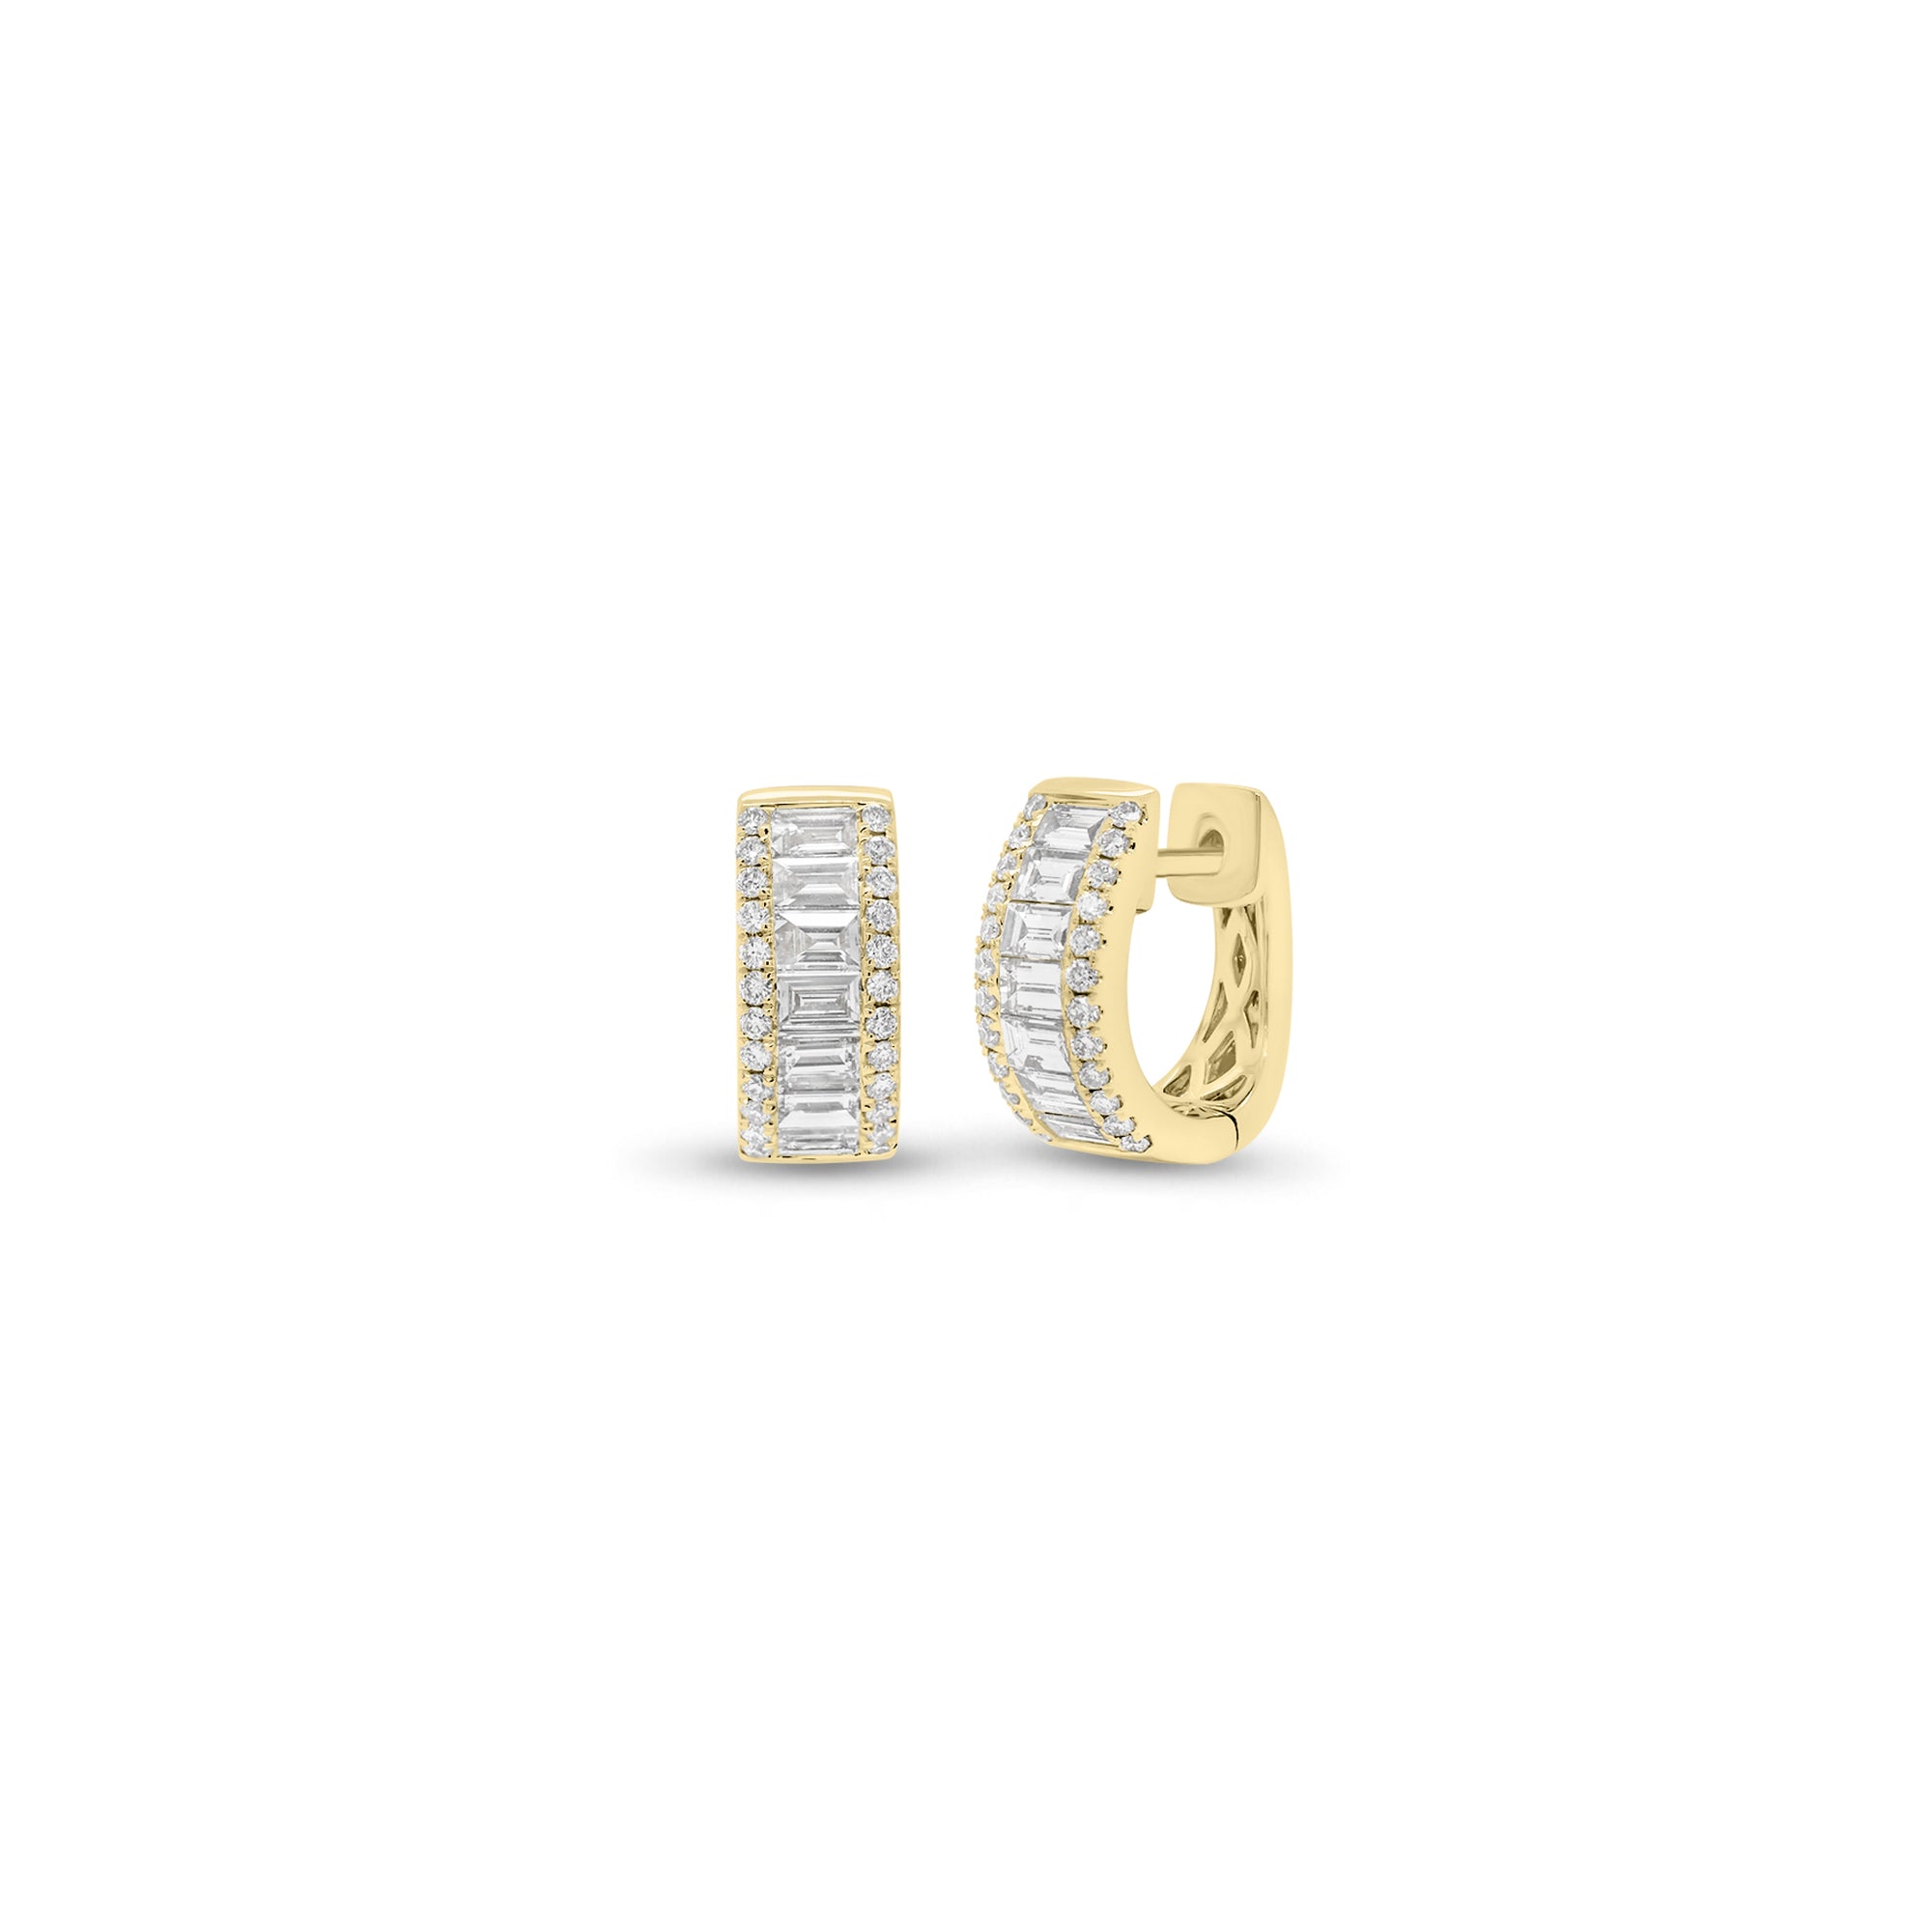 - 18K gold weighing 5.29 grams  - 48 round diamonds weighing 0.25 carats  - 14 straight baguettes weighing 0.82 carats